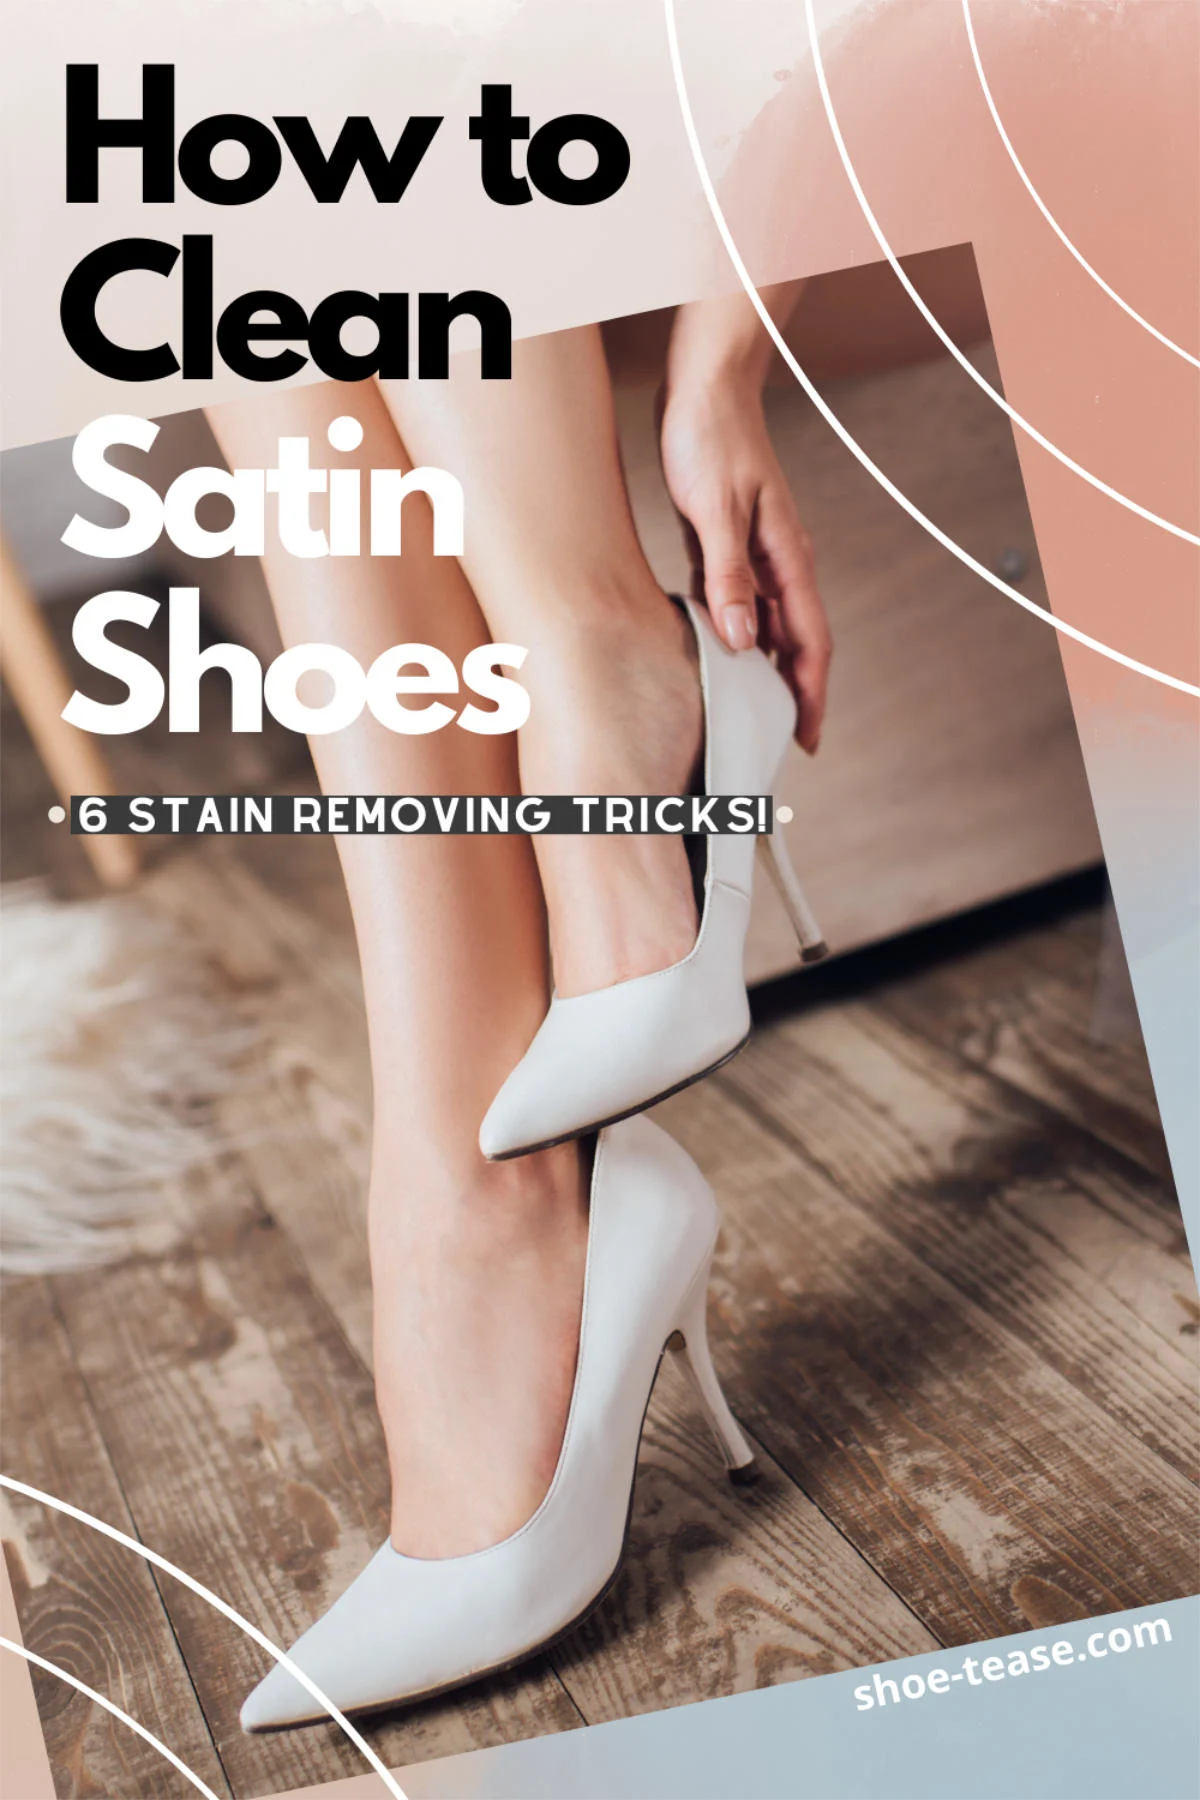 Text reading how to clean sating shoes 6 cleaning tips over cropped tilted view of woman putting on white satin shoes.